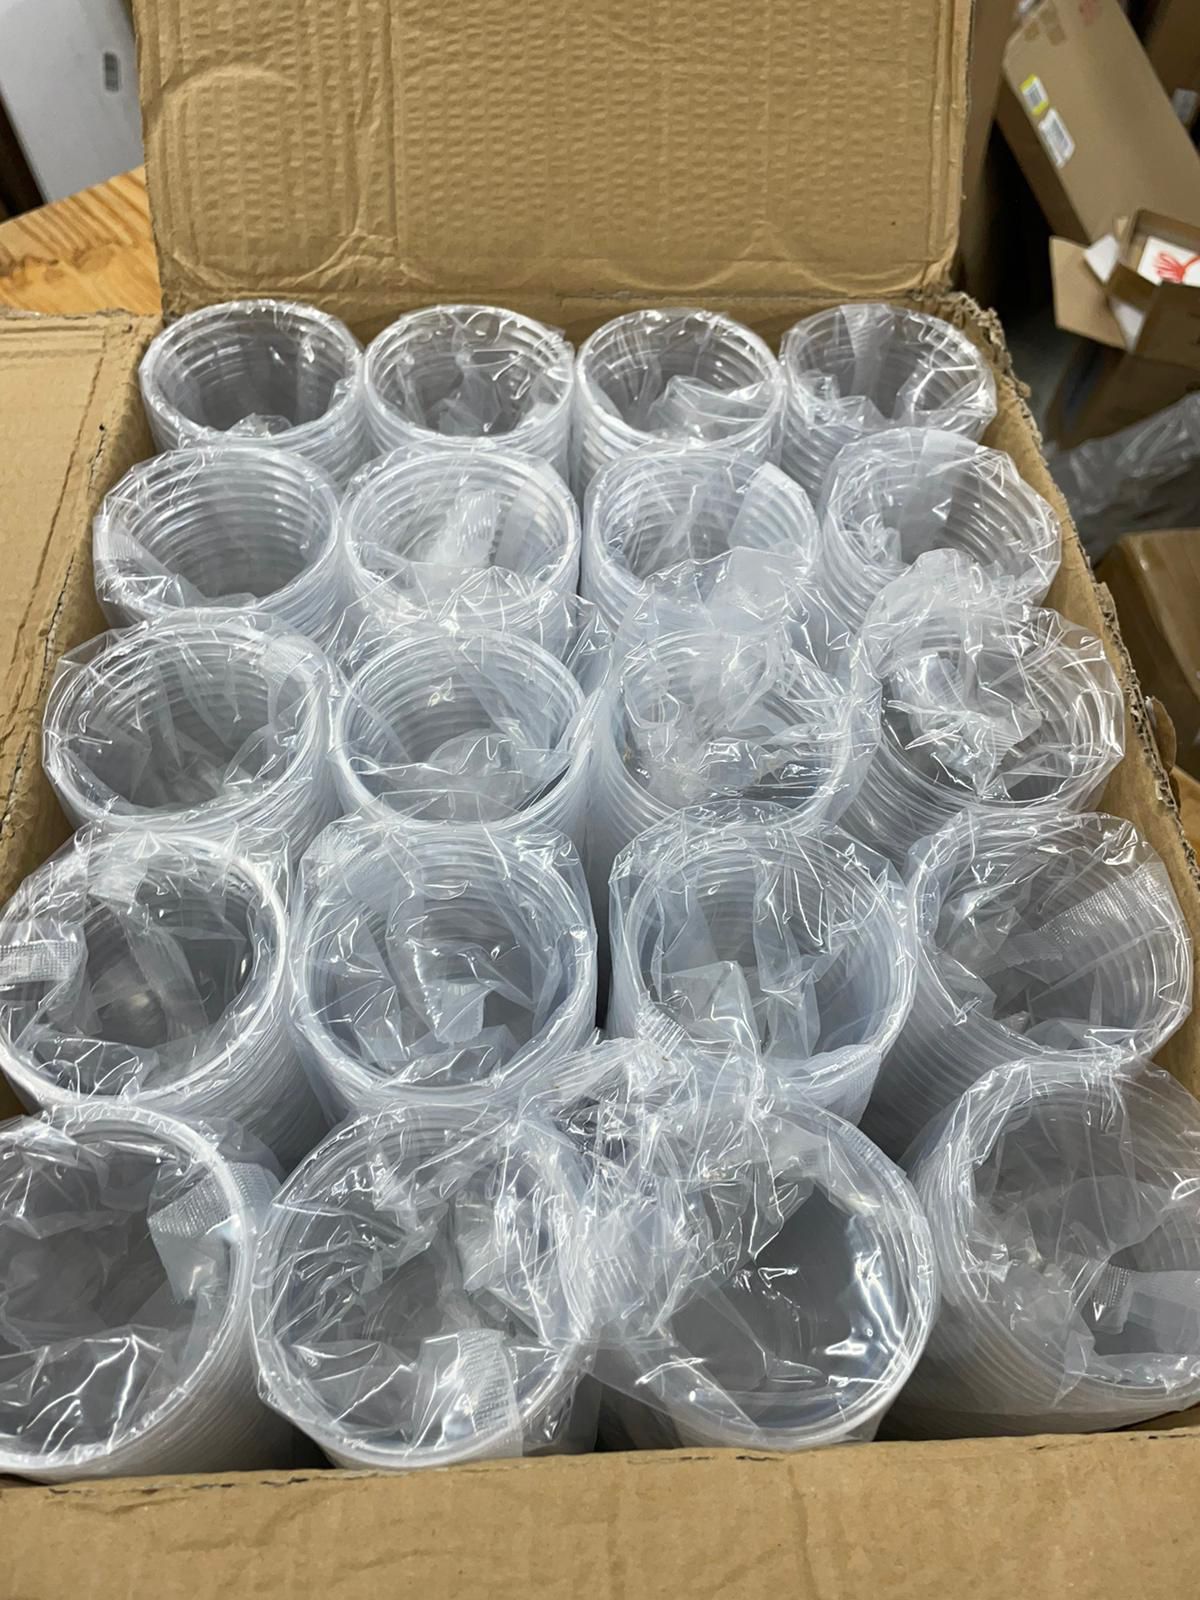 Lilymicky 1000 Pack 10 oz Clear Plastic Cups, Disposable Drinking Cups, Plastic Party Cups for Birthday Parties, Picnics, Ceremonies, and any Events